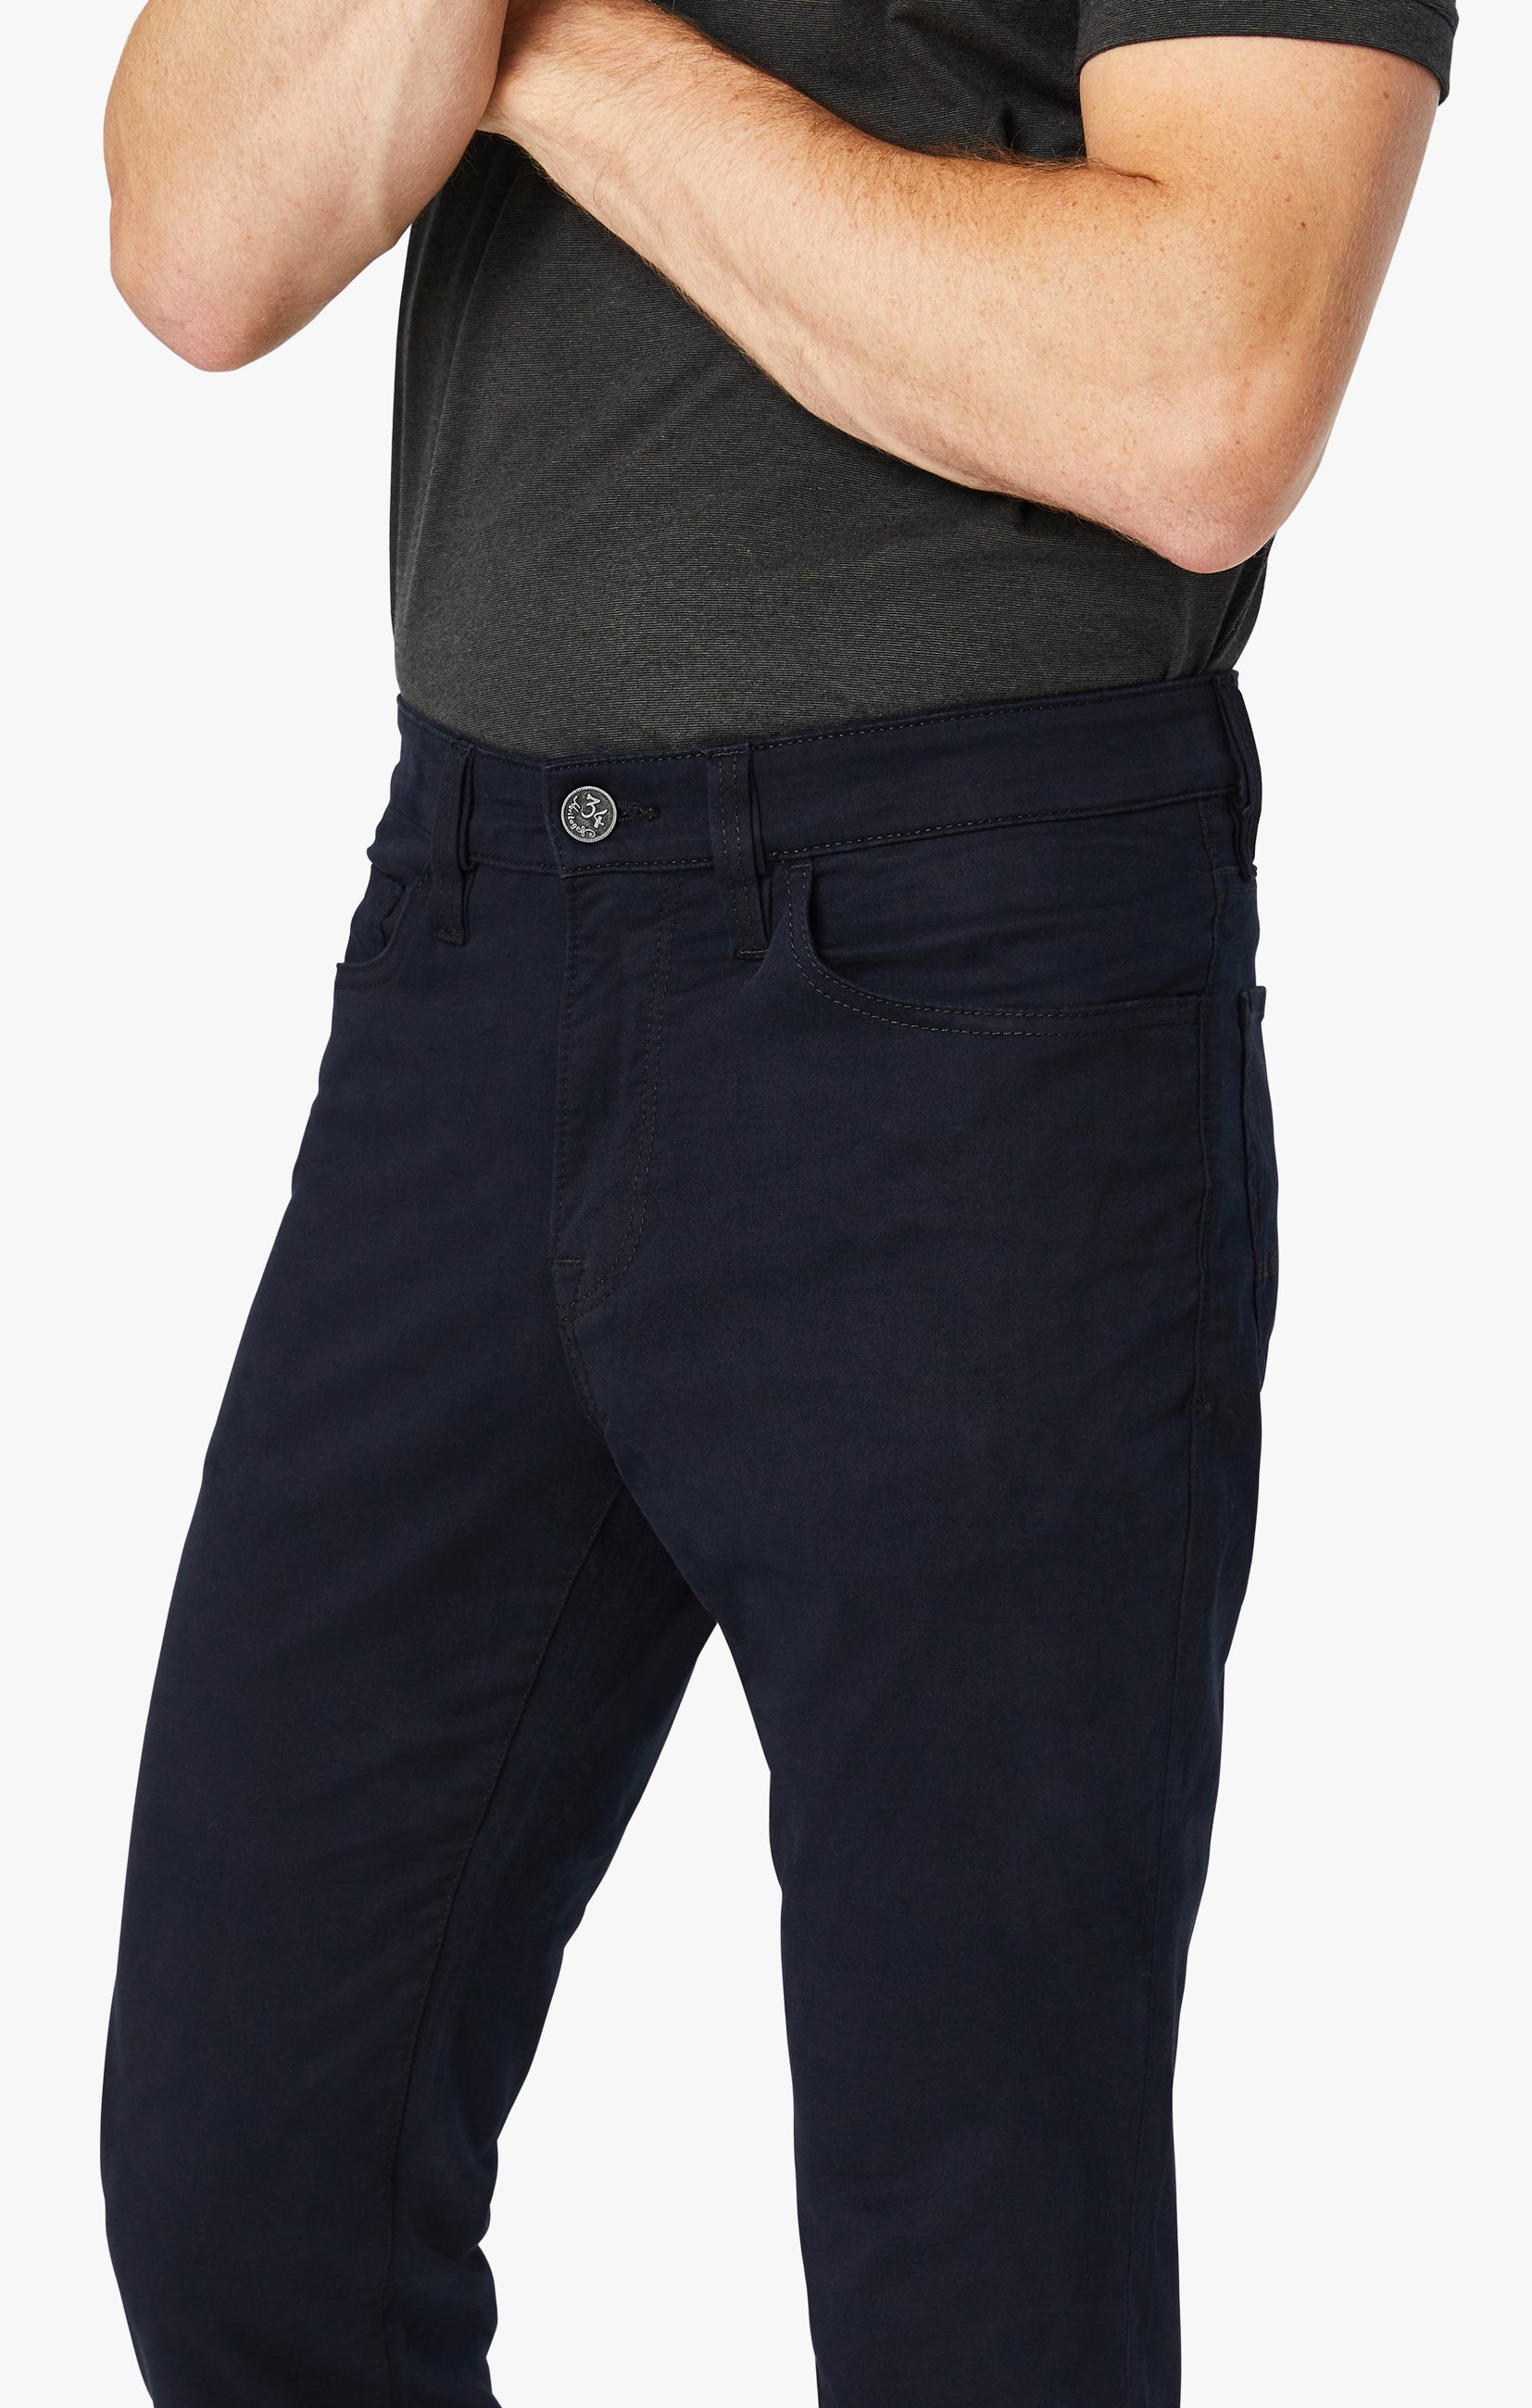 Charisma Relaxed Straight Pants in Navy Twill Image 3